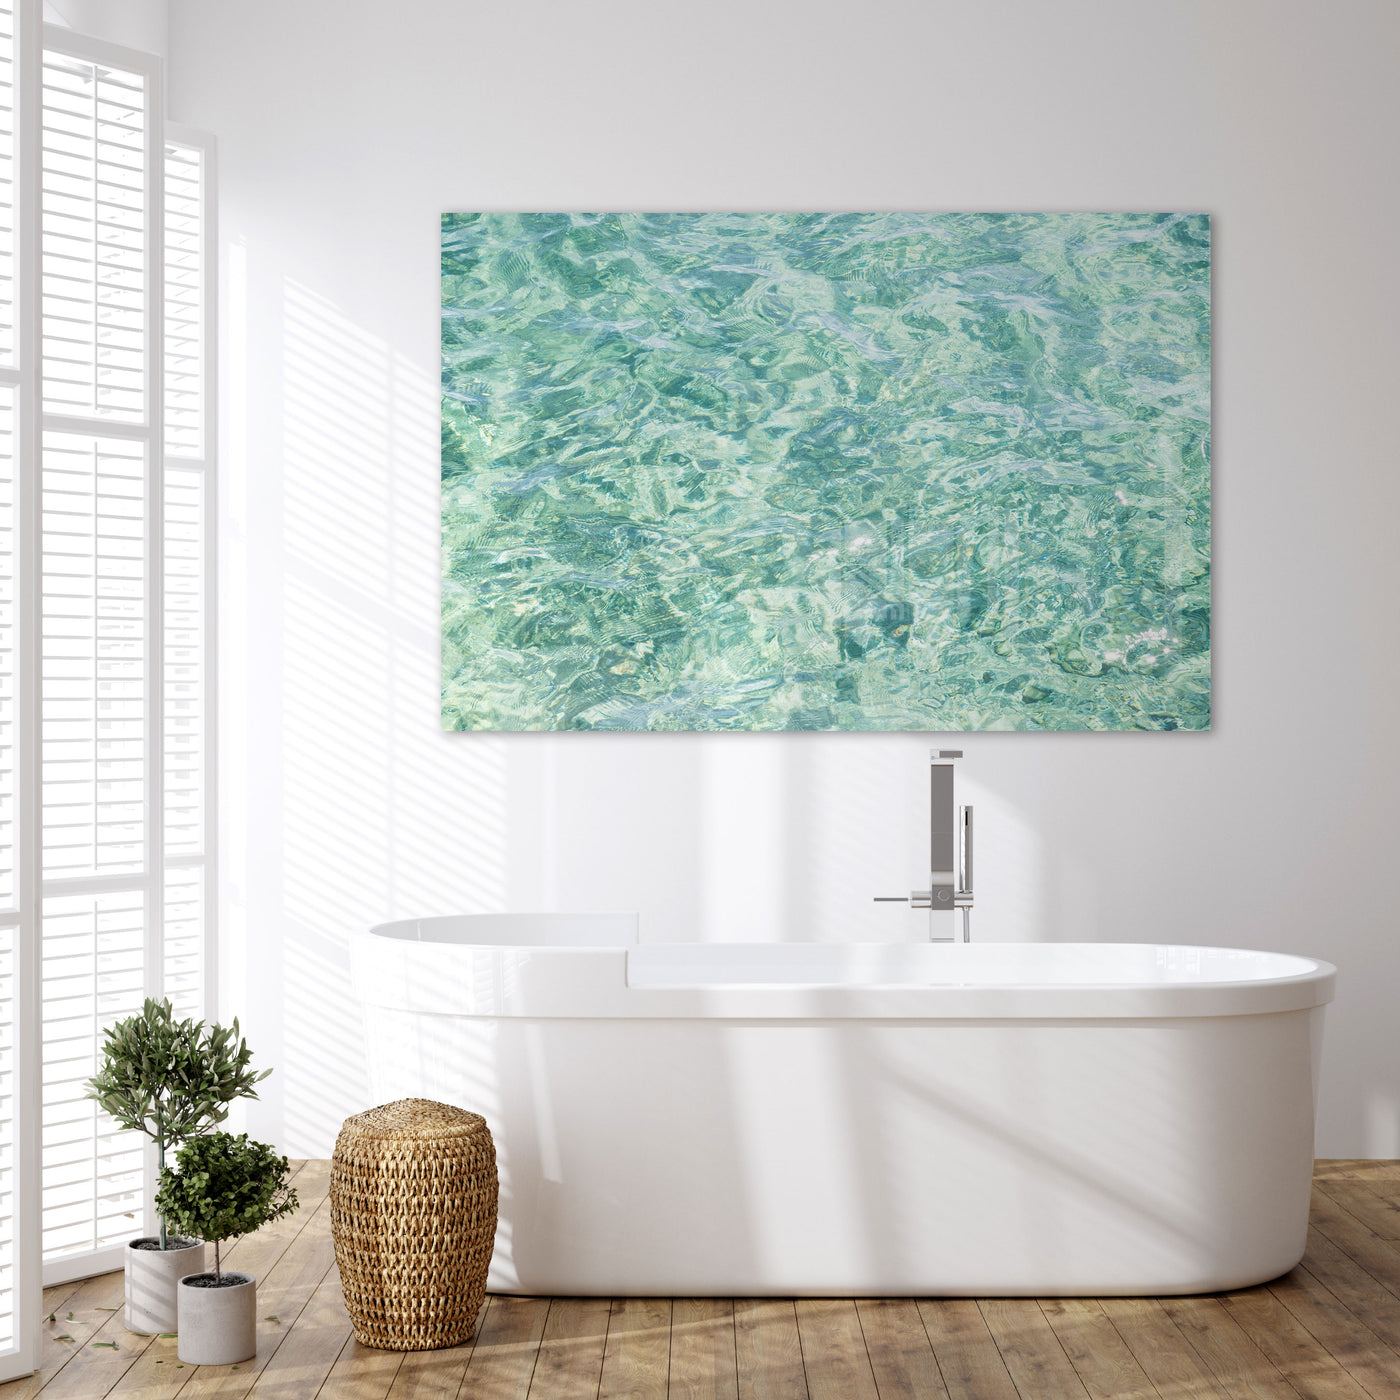 Extra large acrylic glass wall art by Cattie Coyle Photography in bathroom